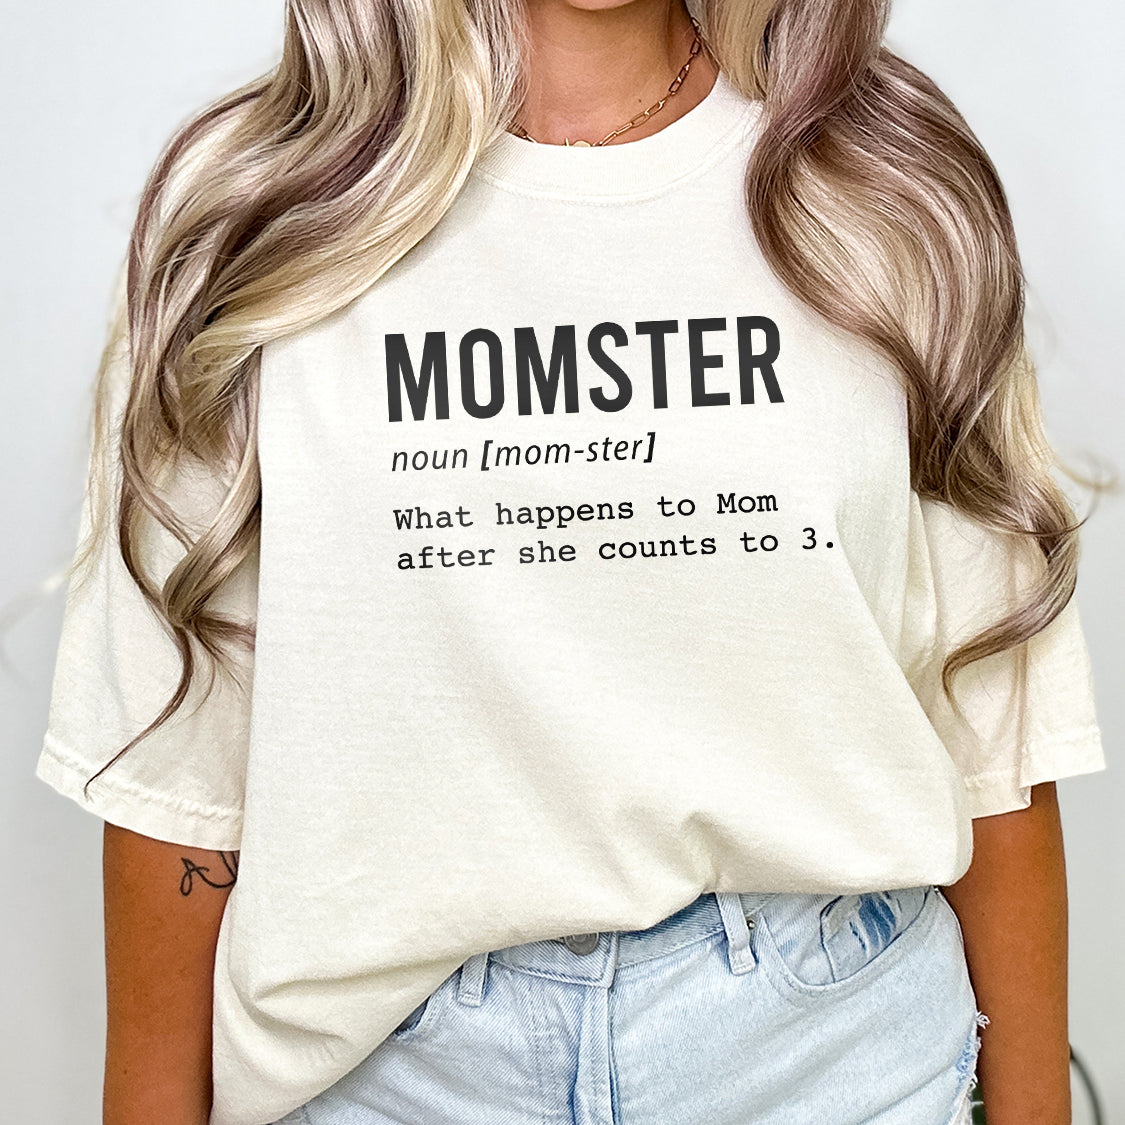 Funny Definition of Momster T-shirt - Funny Family Retro Vintage Design Printed T-Shirt